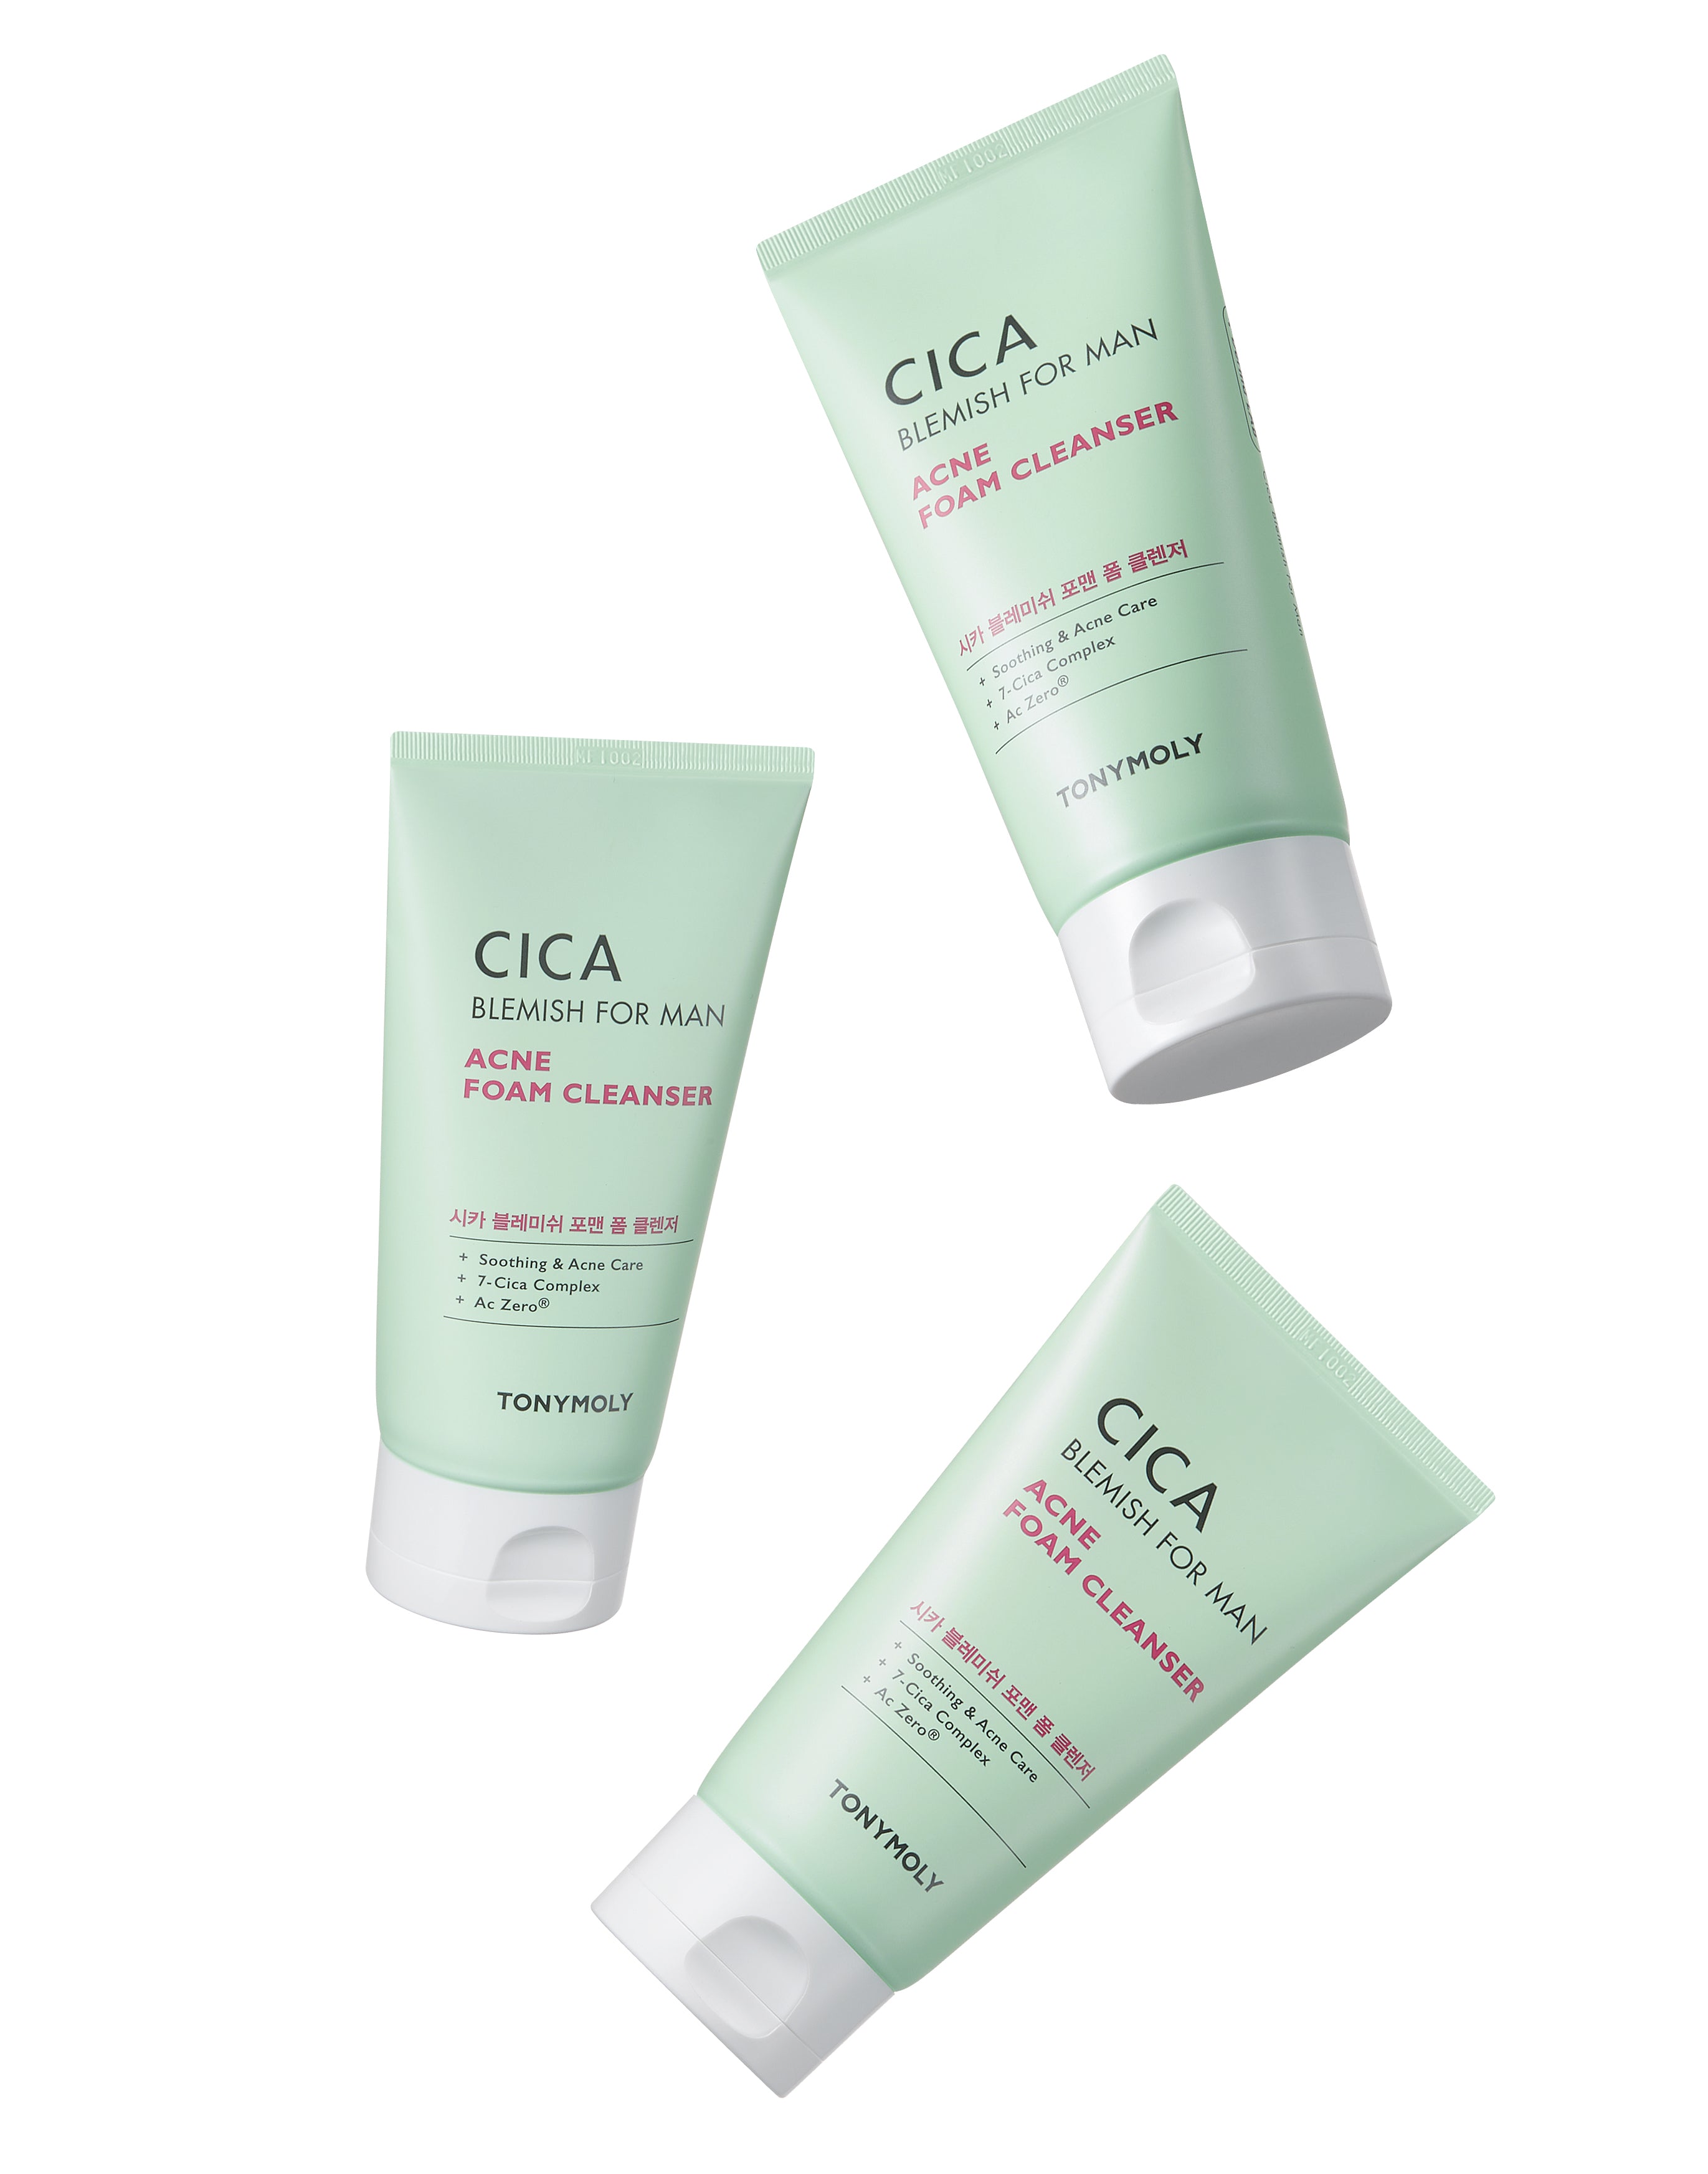 CICA Blemish For Man Acne Foam Cleanser